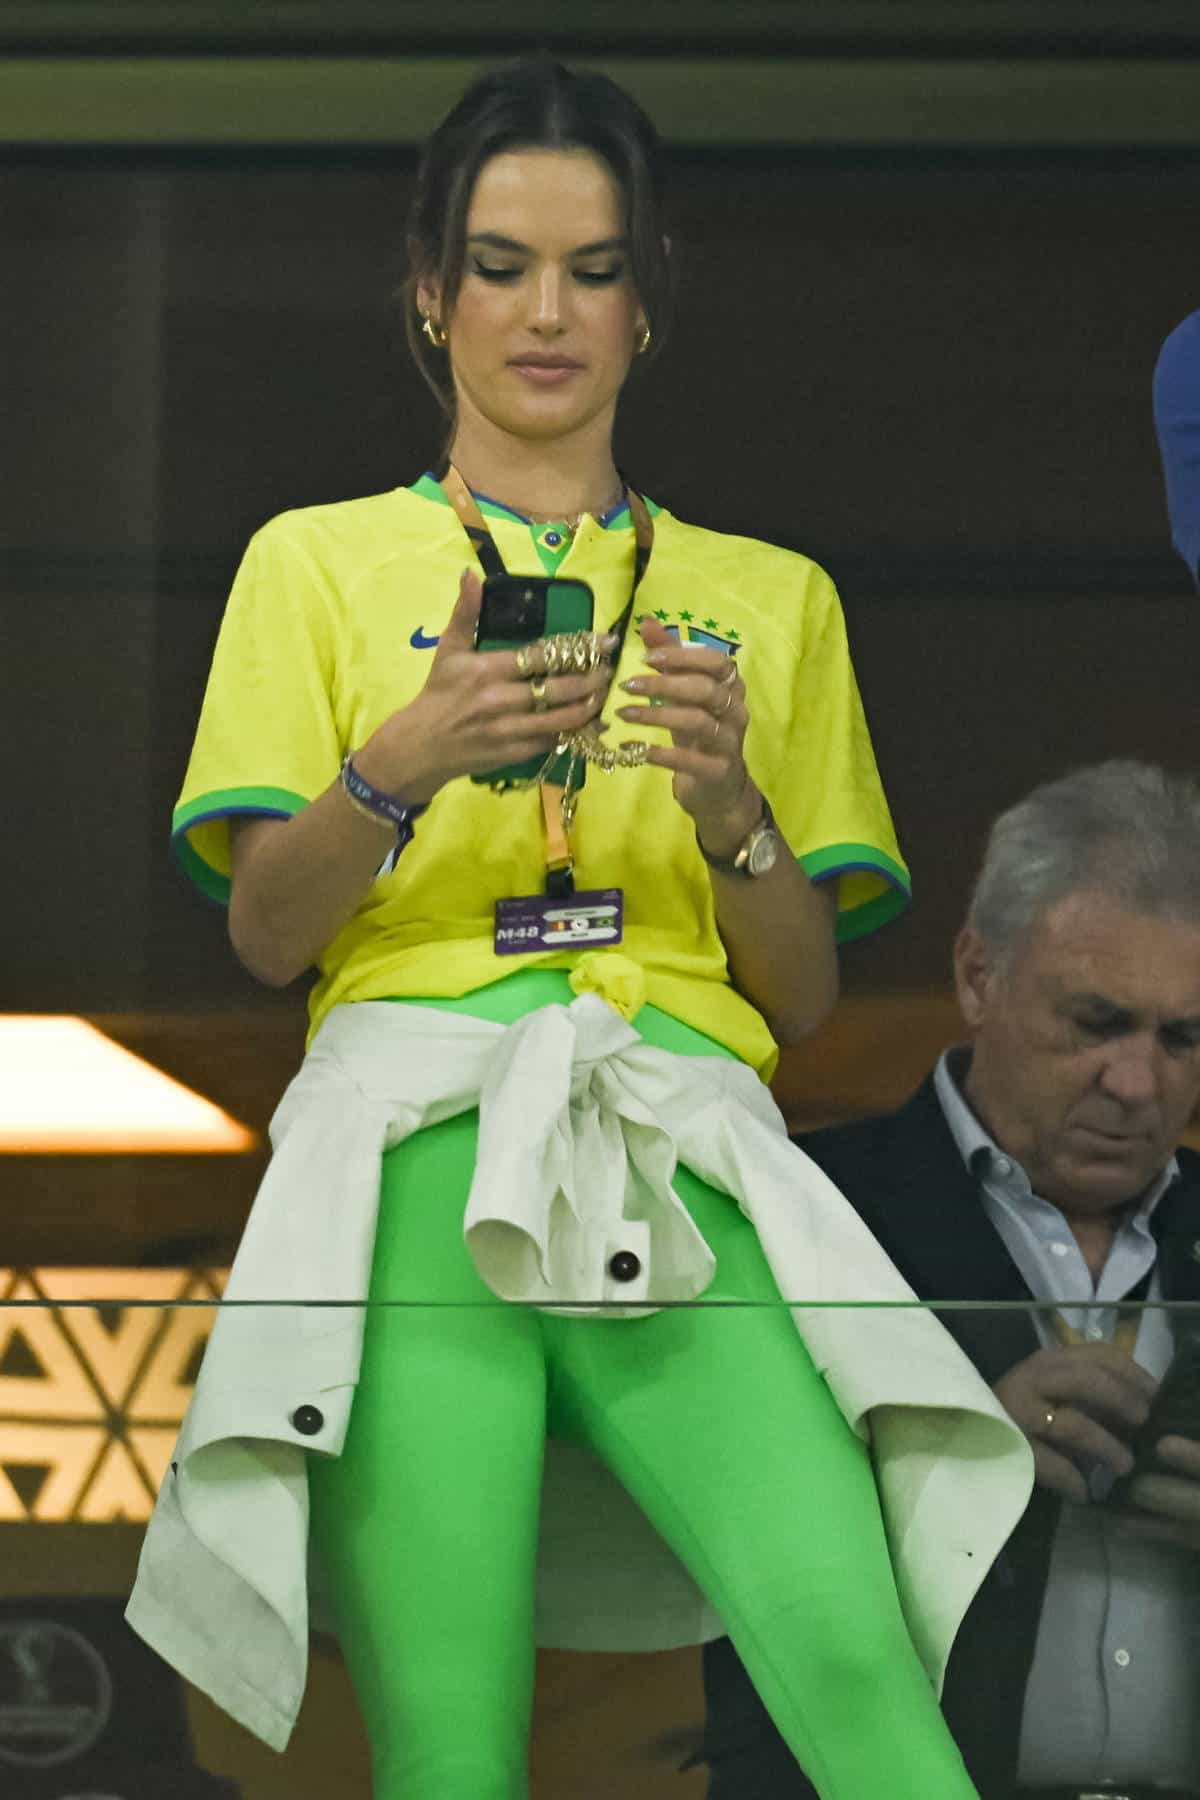 Alessandra Ambrosio in Yellow and Green Proudly Cheering on Brazil in Qatar